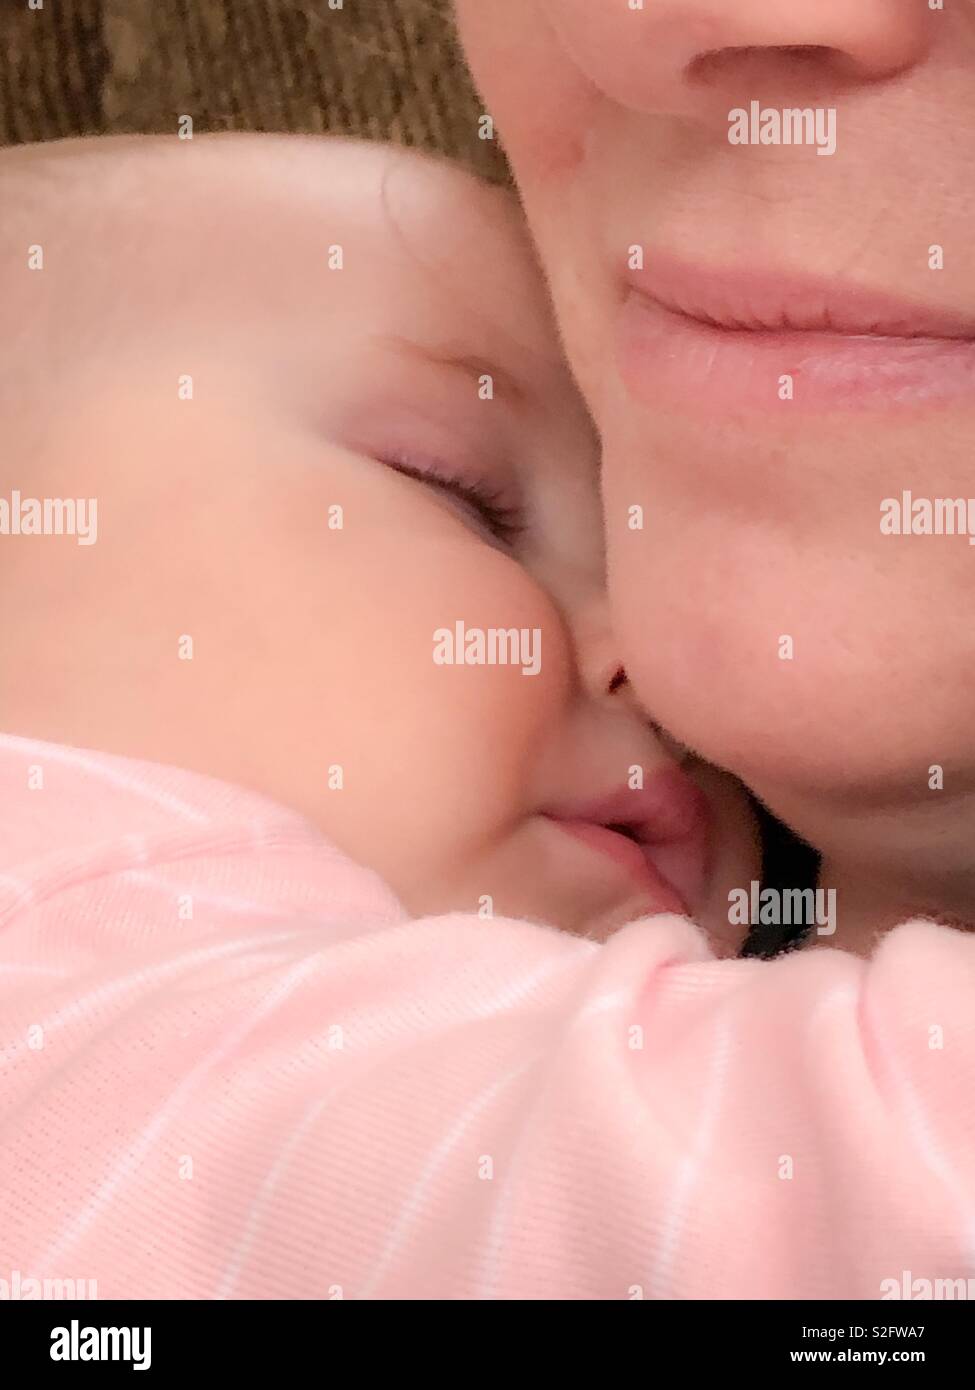 A close up of a baby girl sleeping next to a woman’s chin. Stock Photo